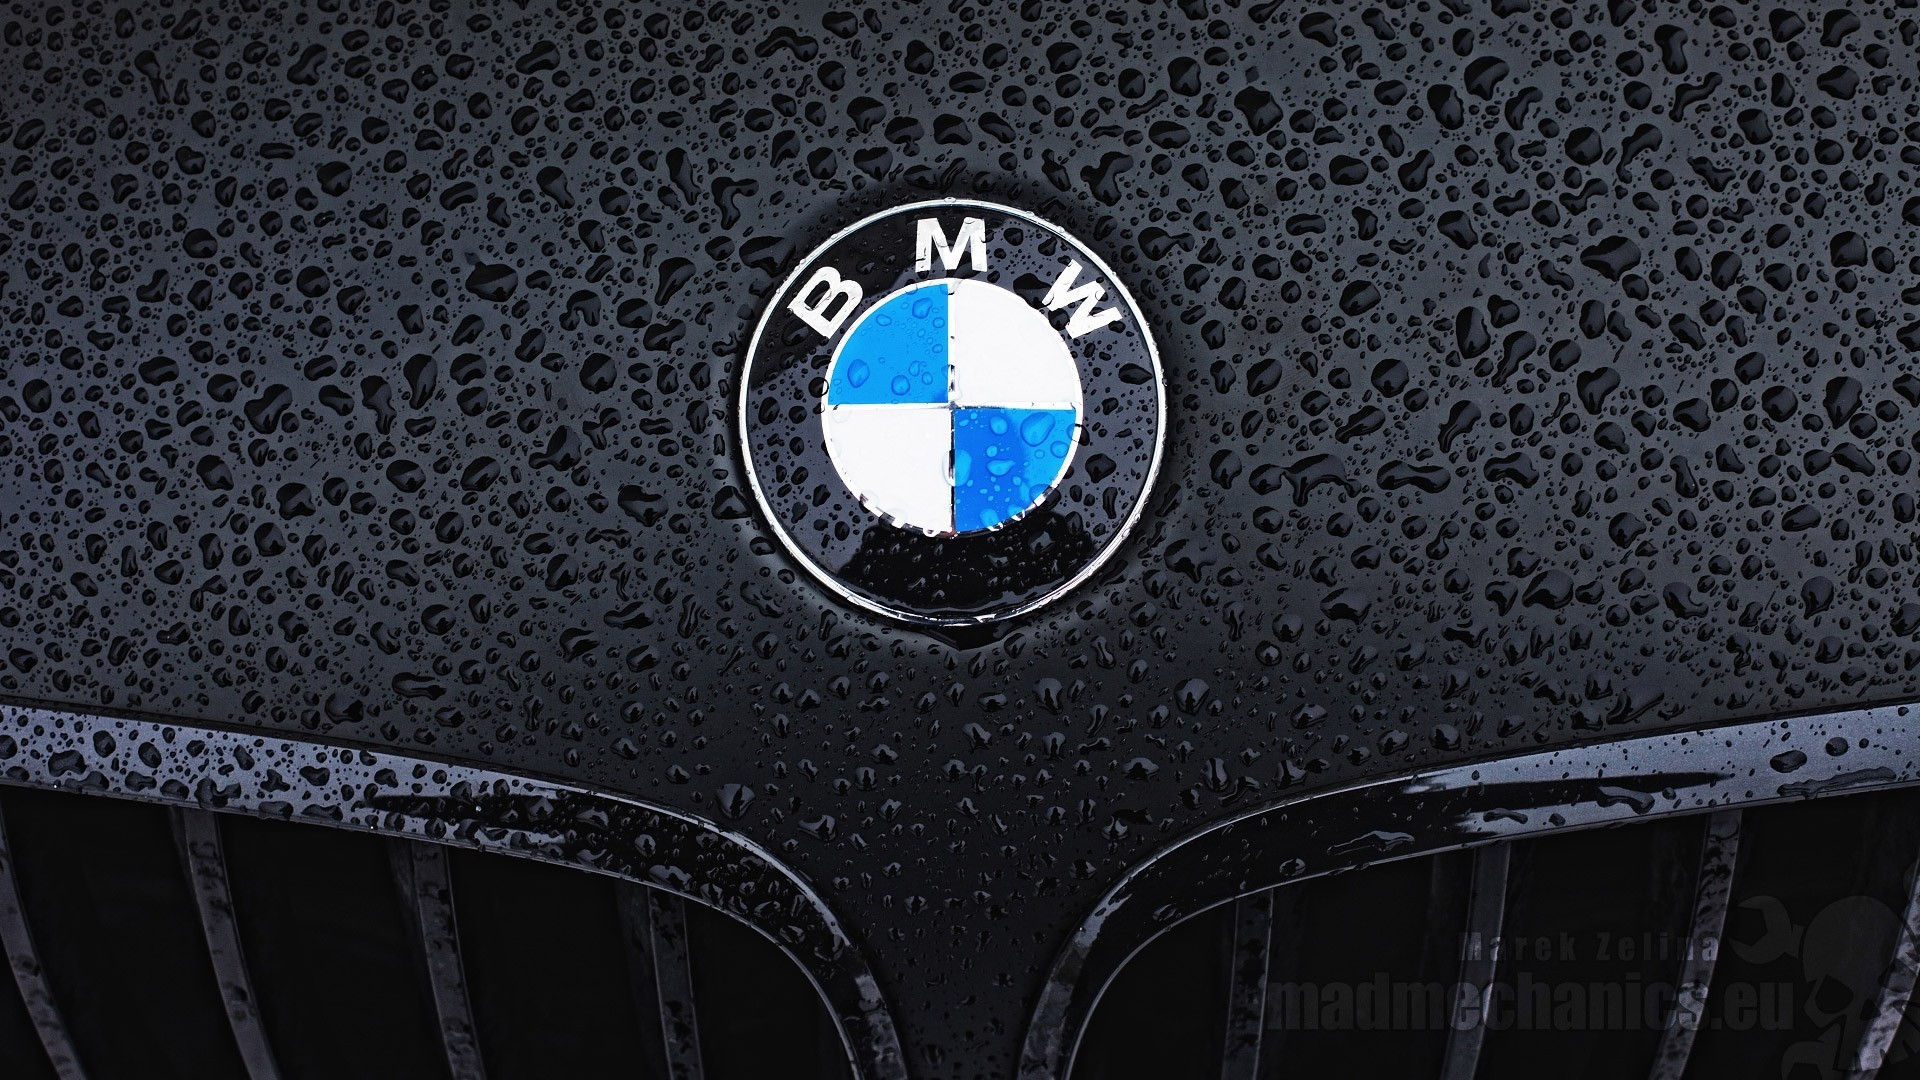 bmw logo wallpaper check out these 72 awesome bmw logo wallpaper for